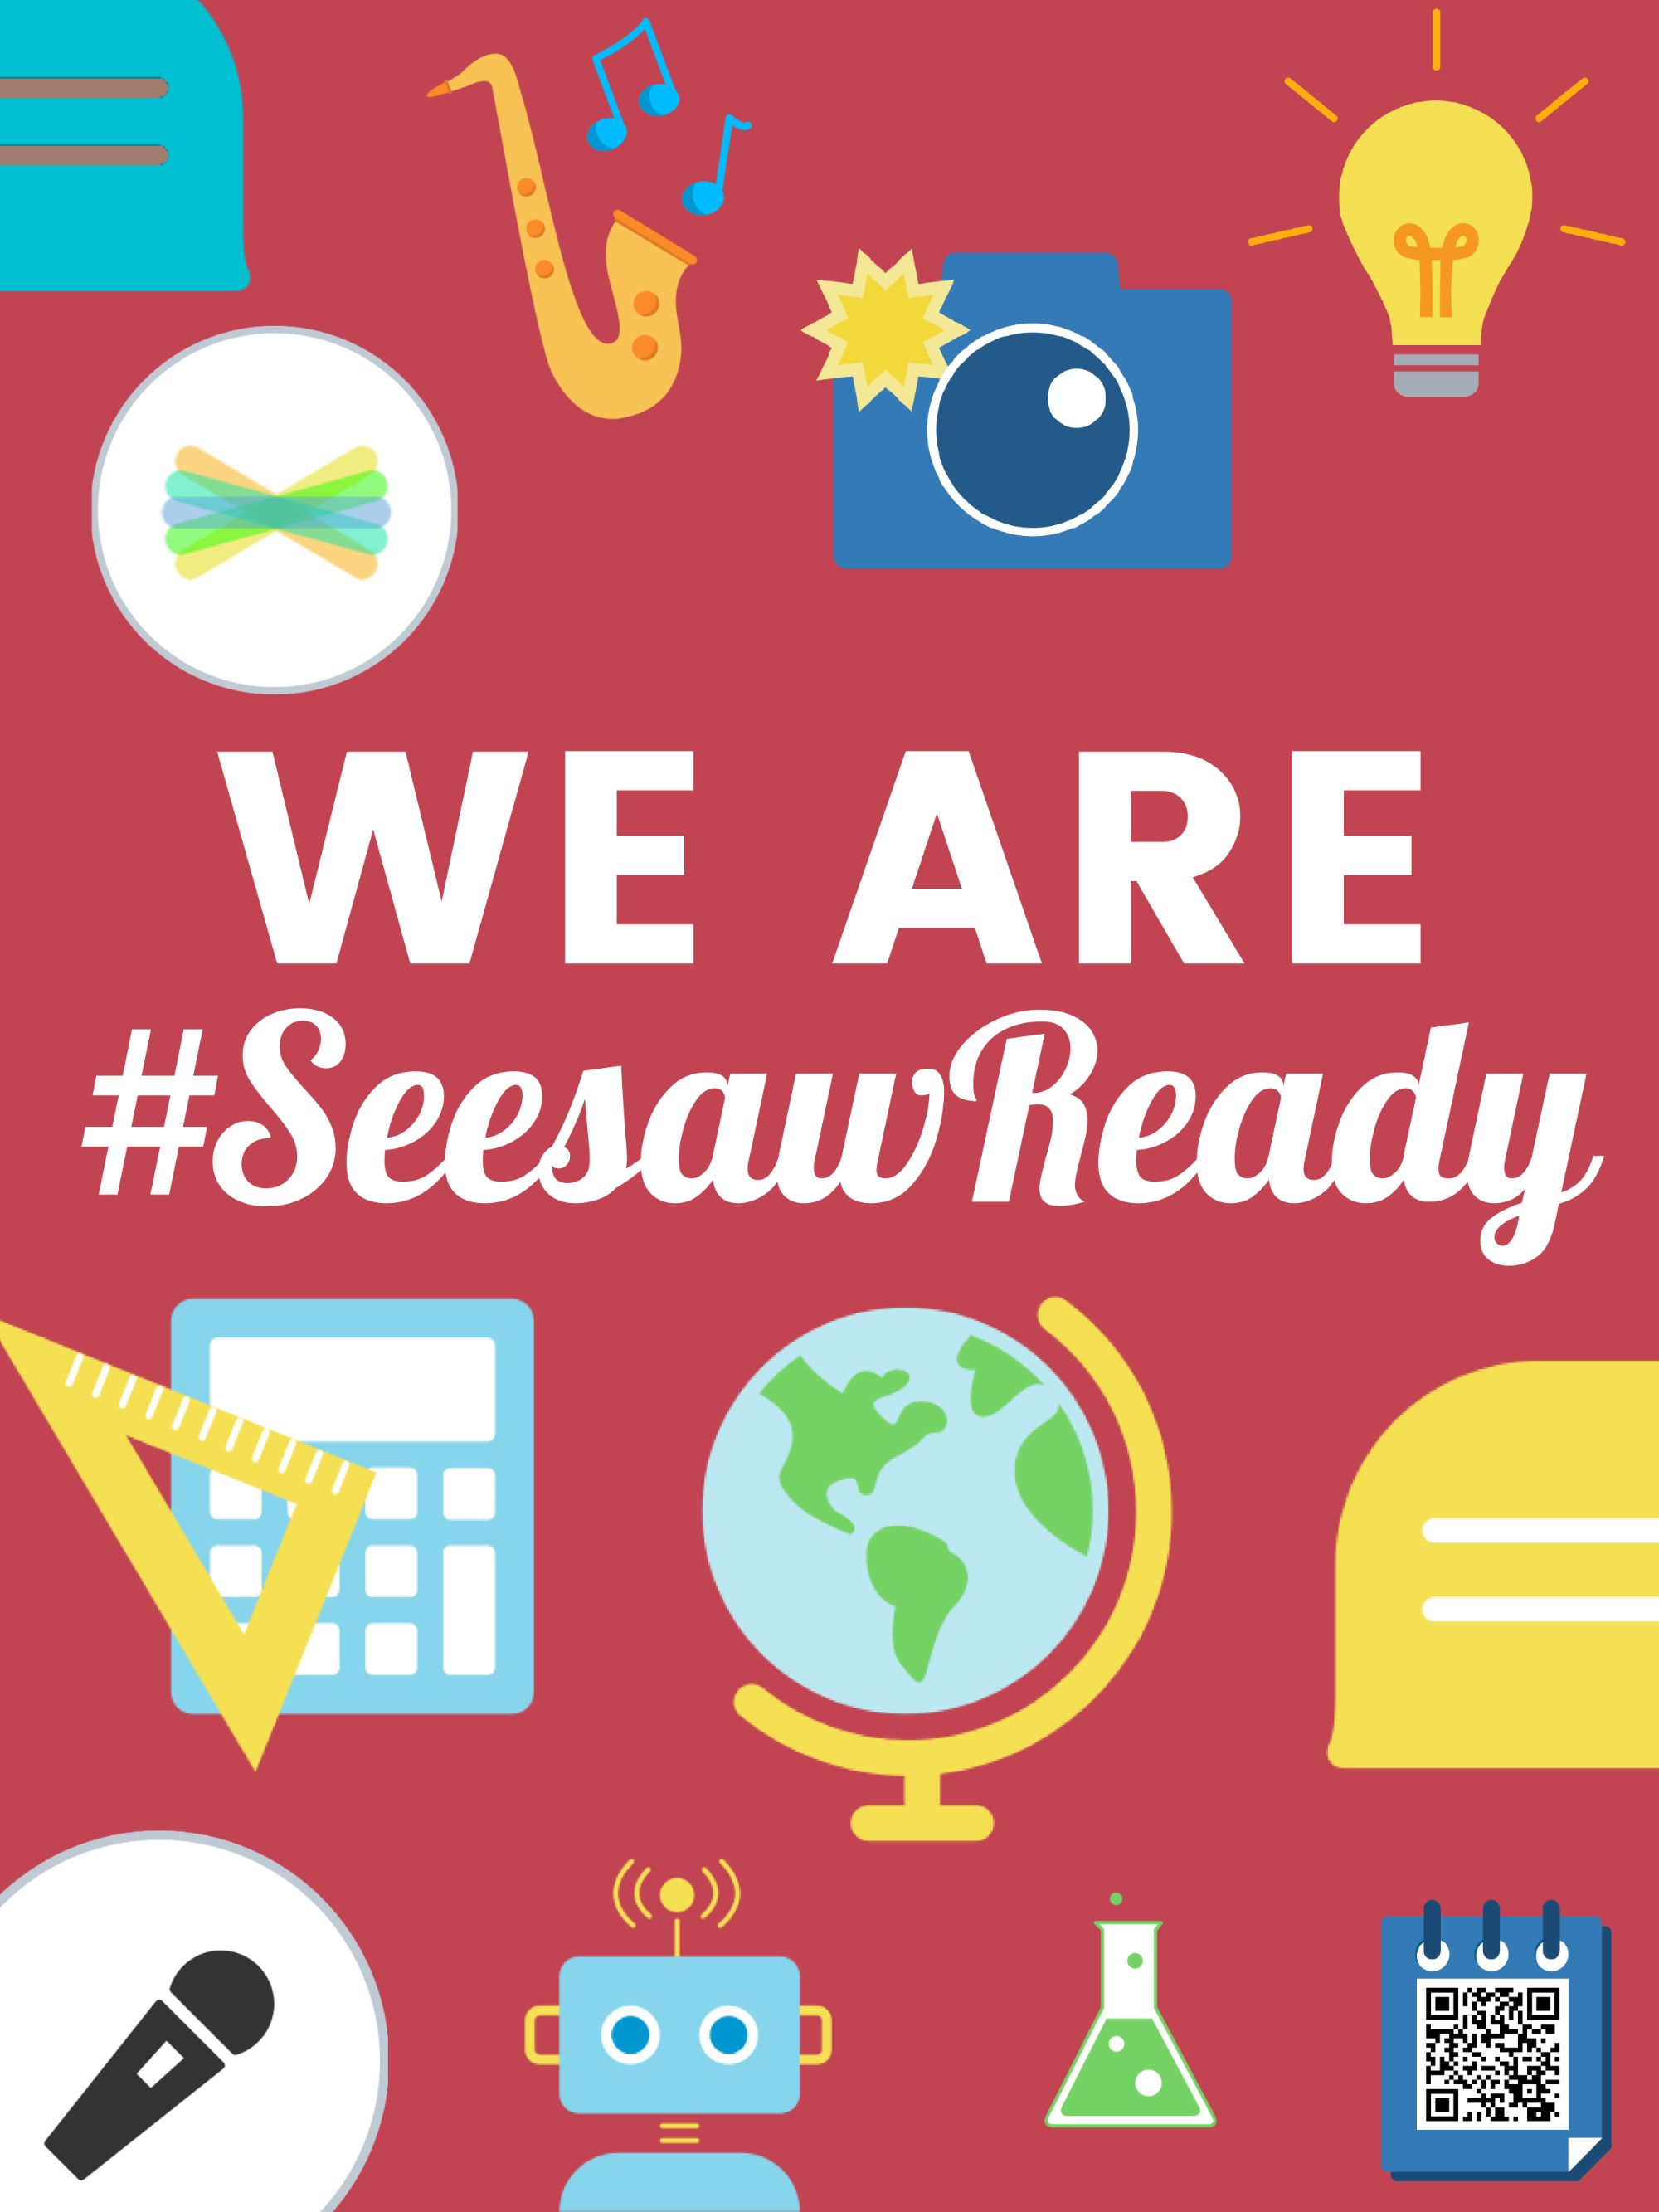 Are You #SeesawReady?